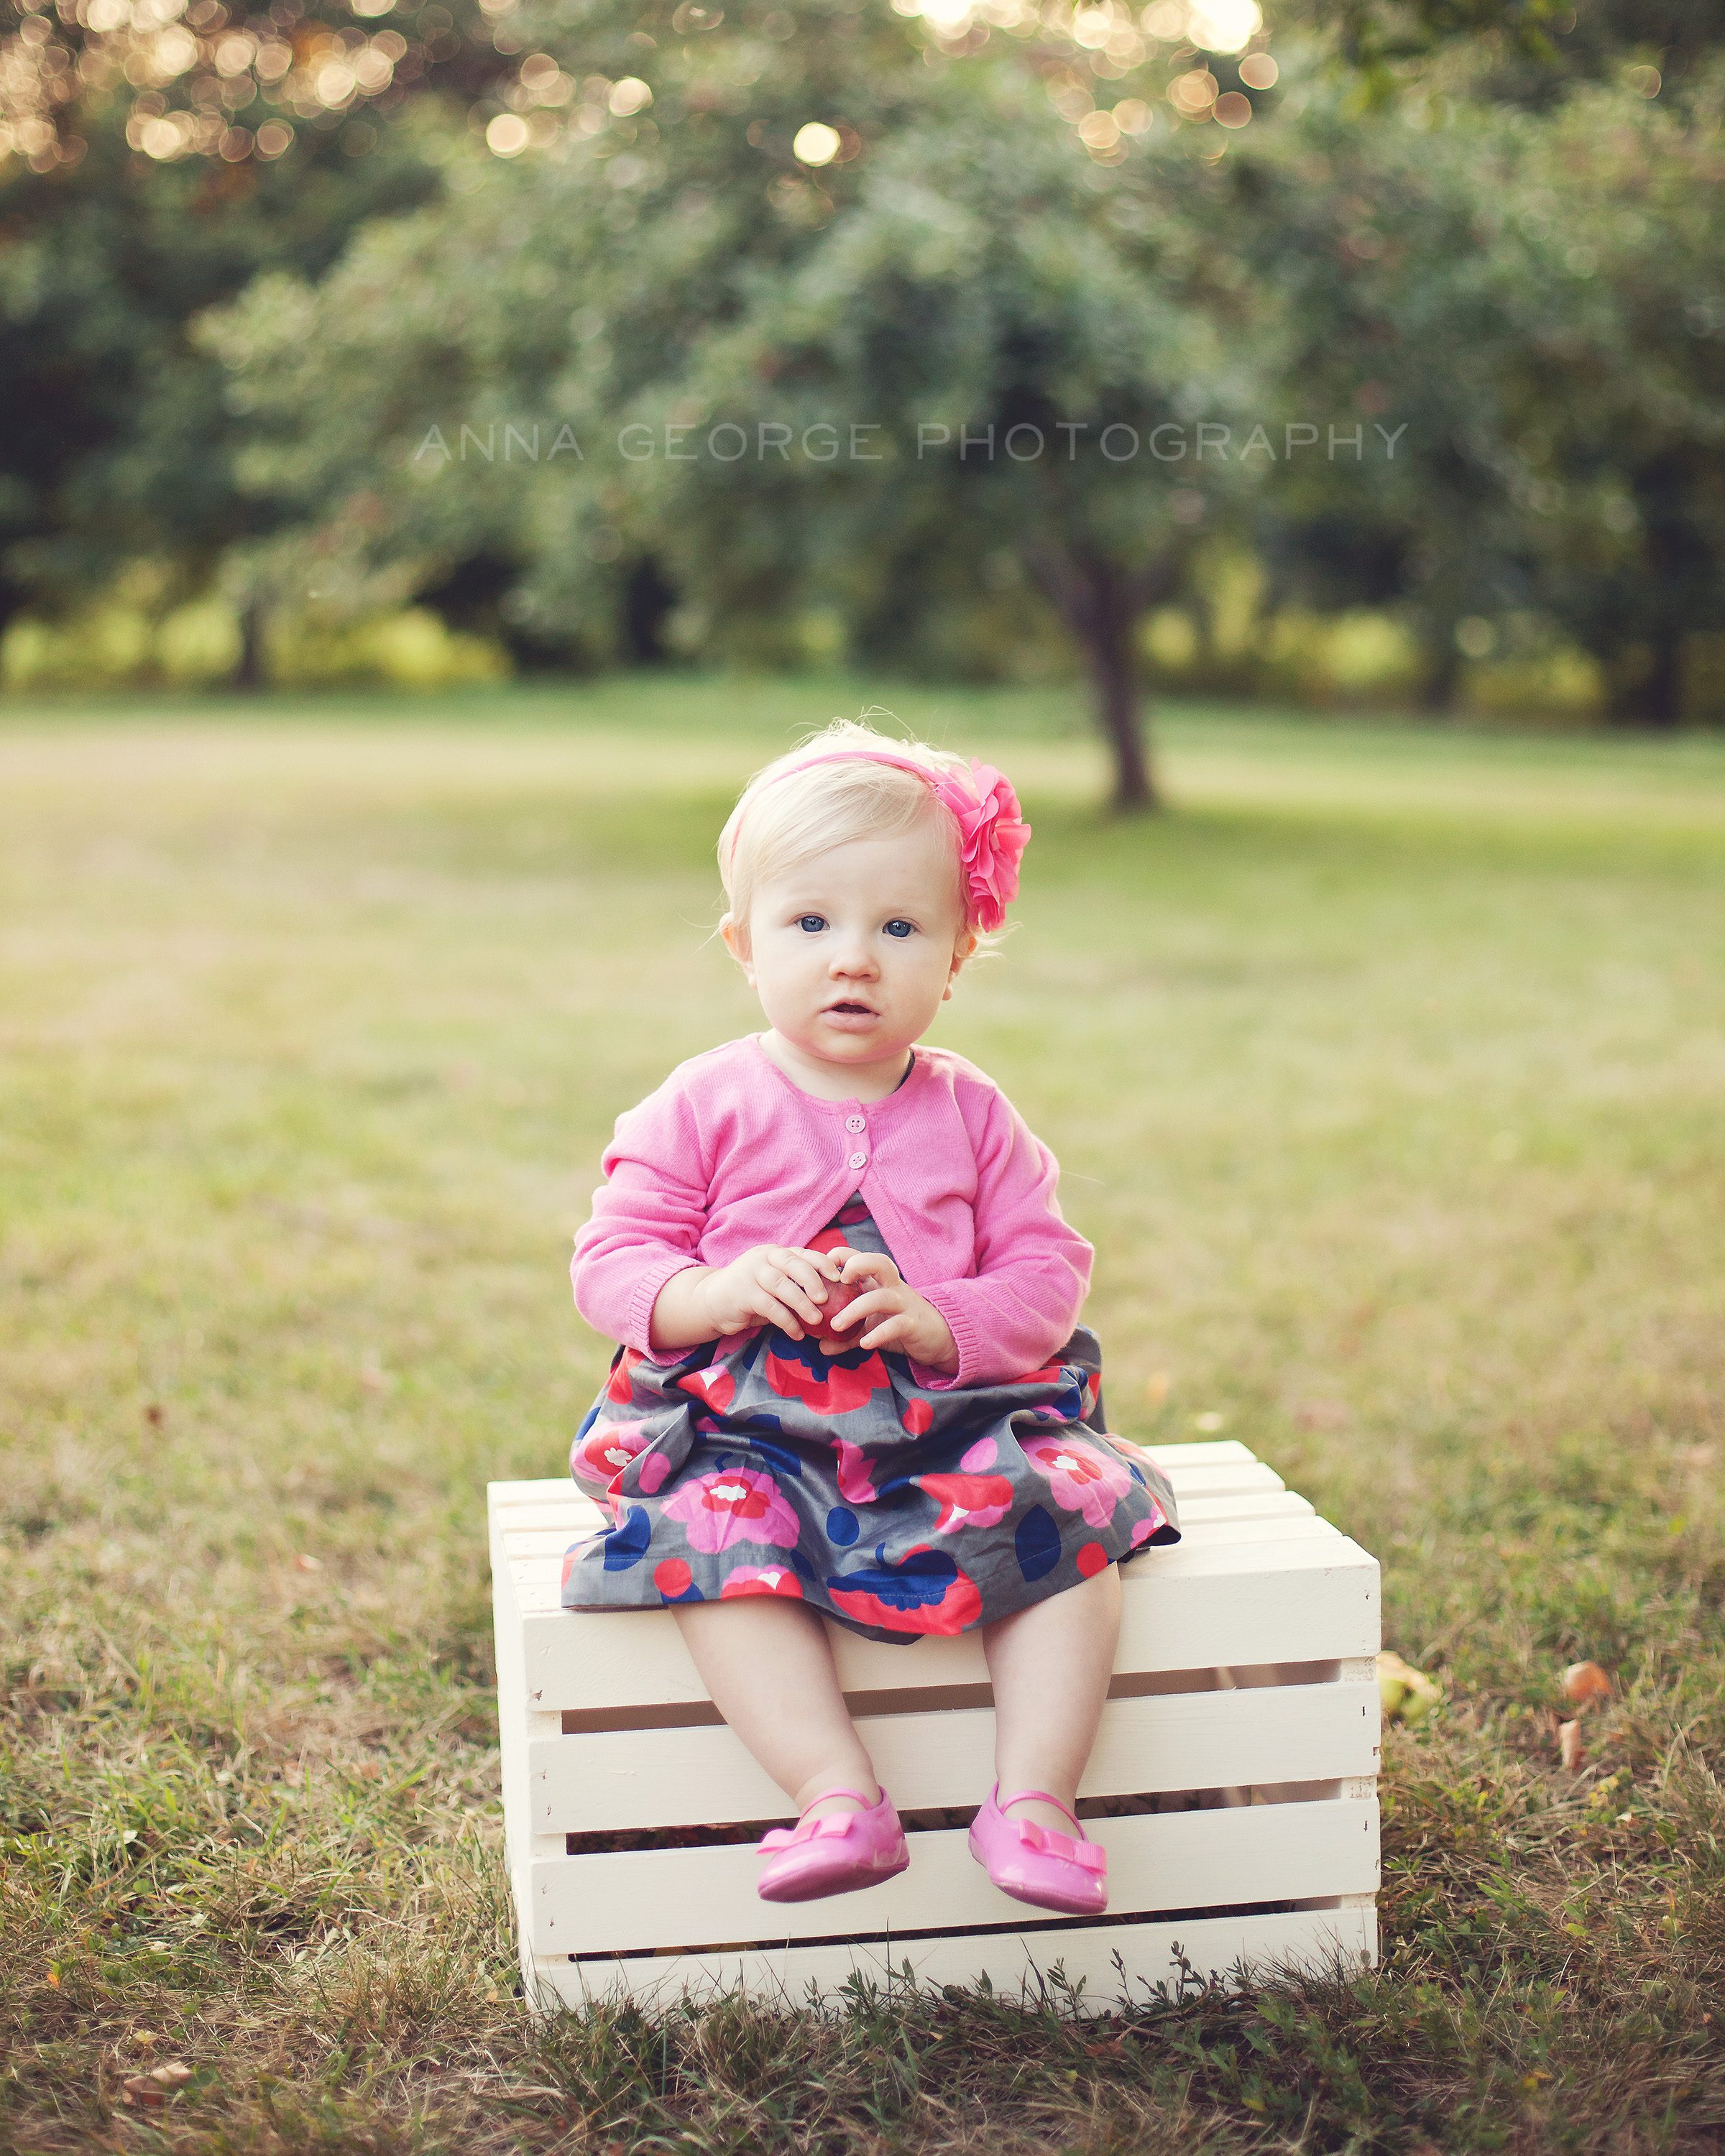 Anna George Photography - Madison WI Baby Photographer - www.annageorgephoto.com